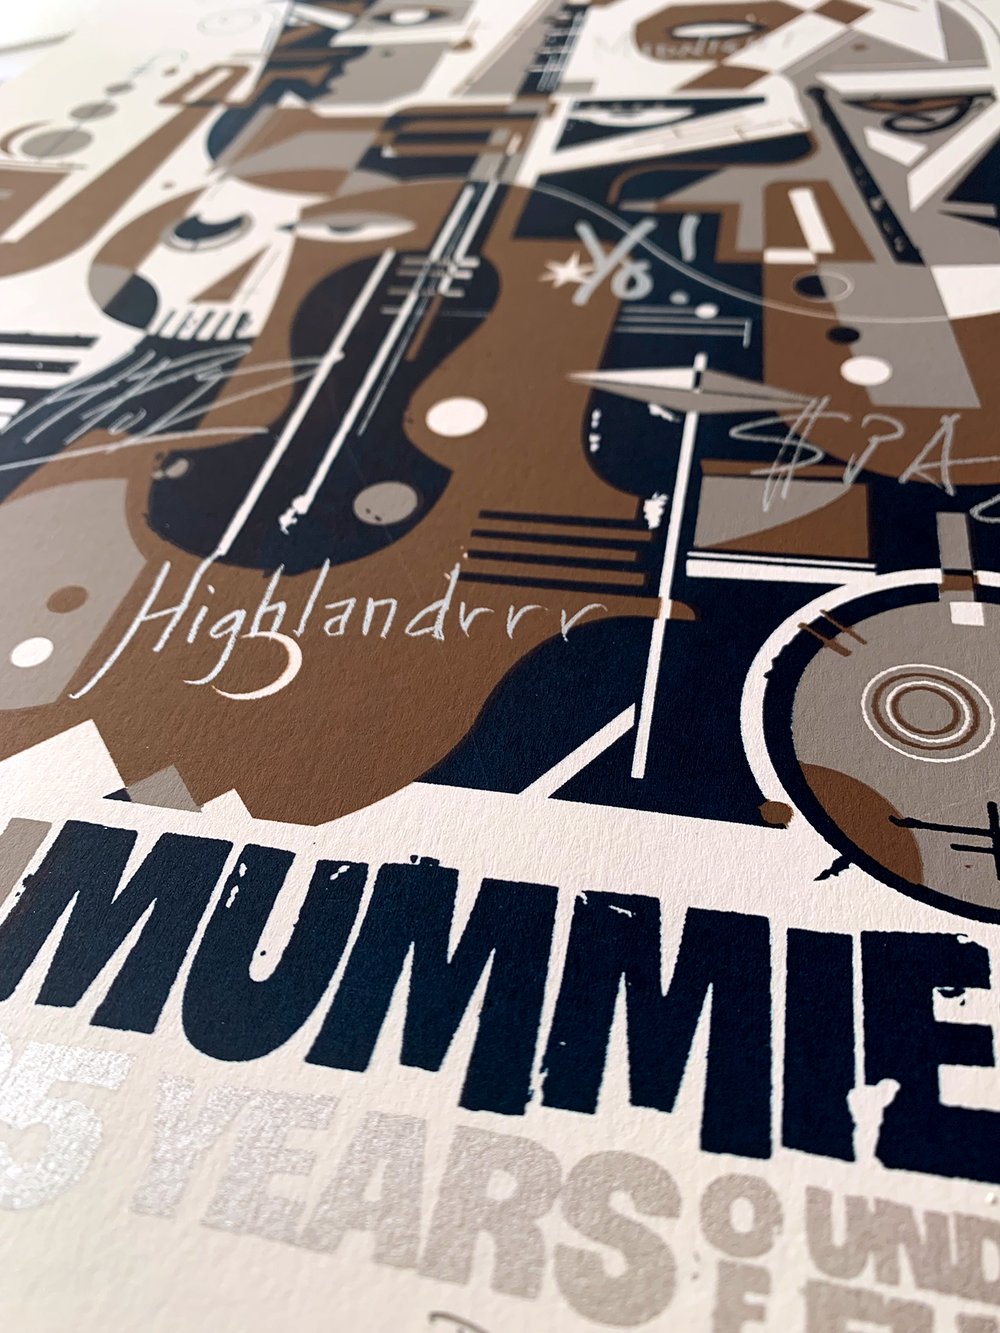 Here Come the Mummies - 25 Years of Undead Funk